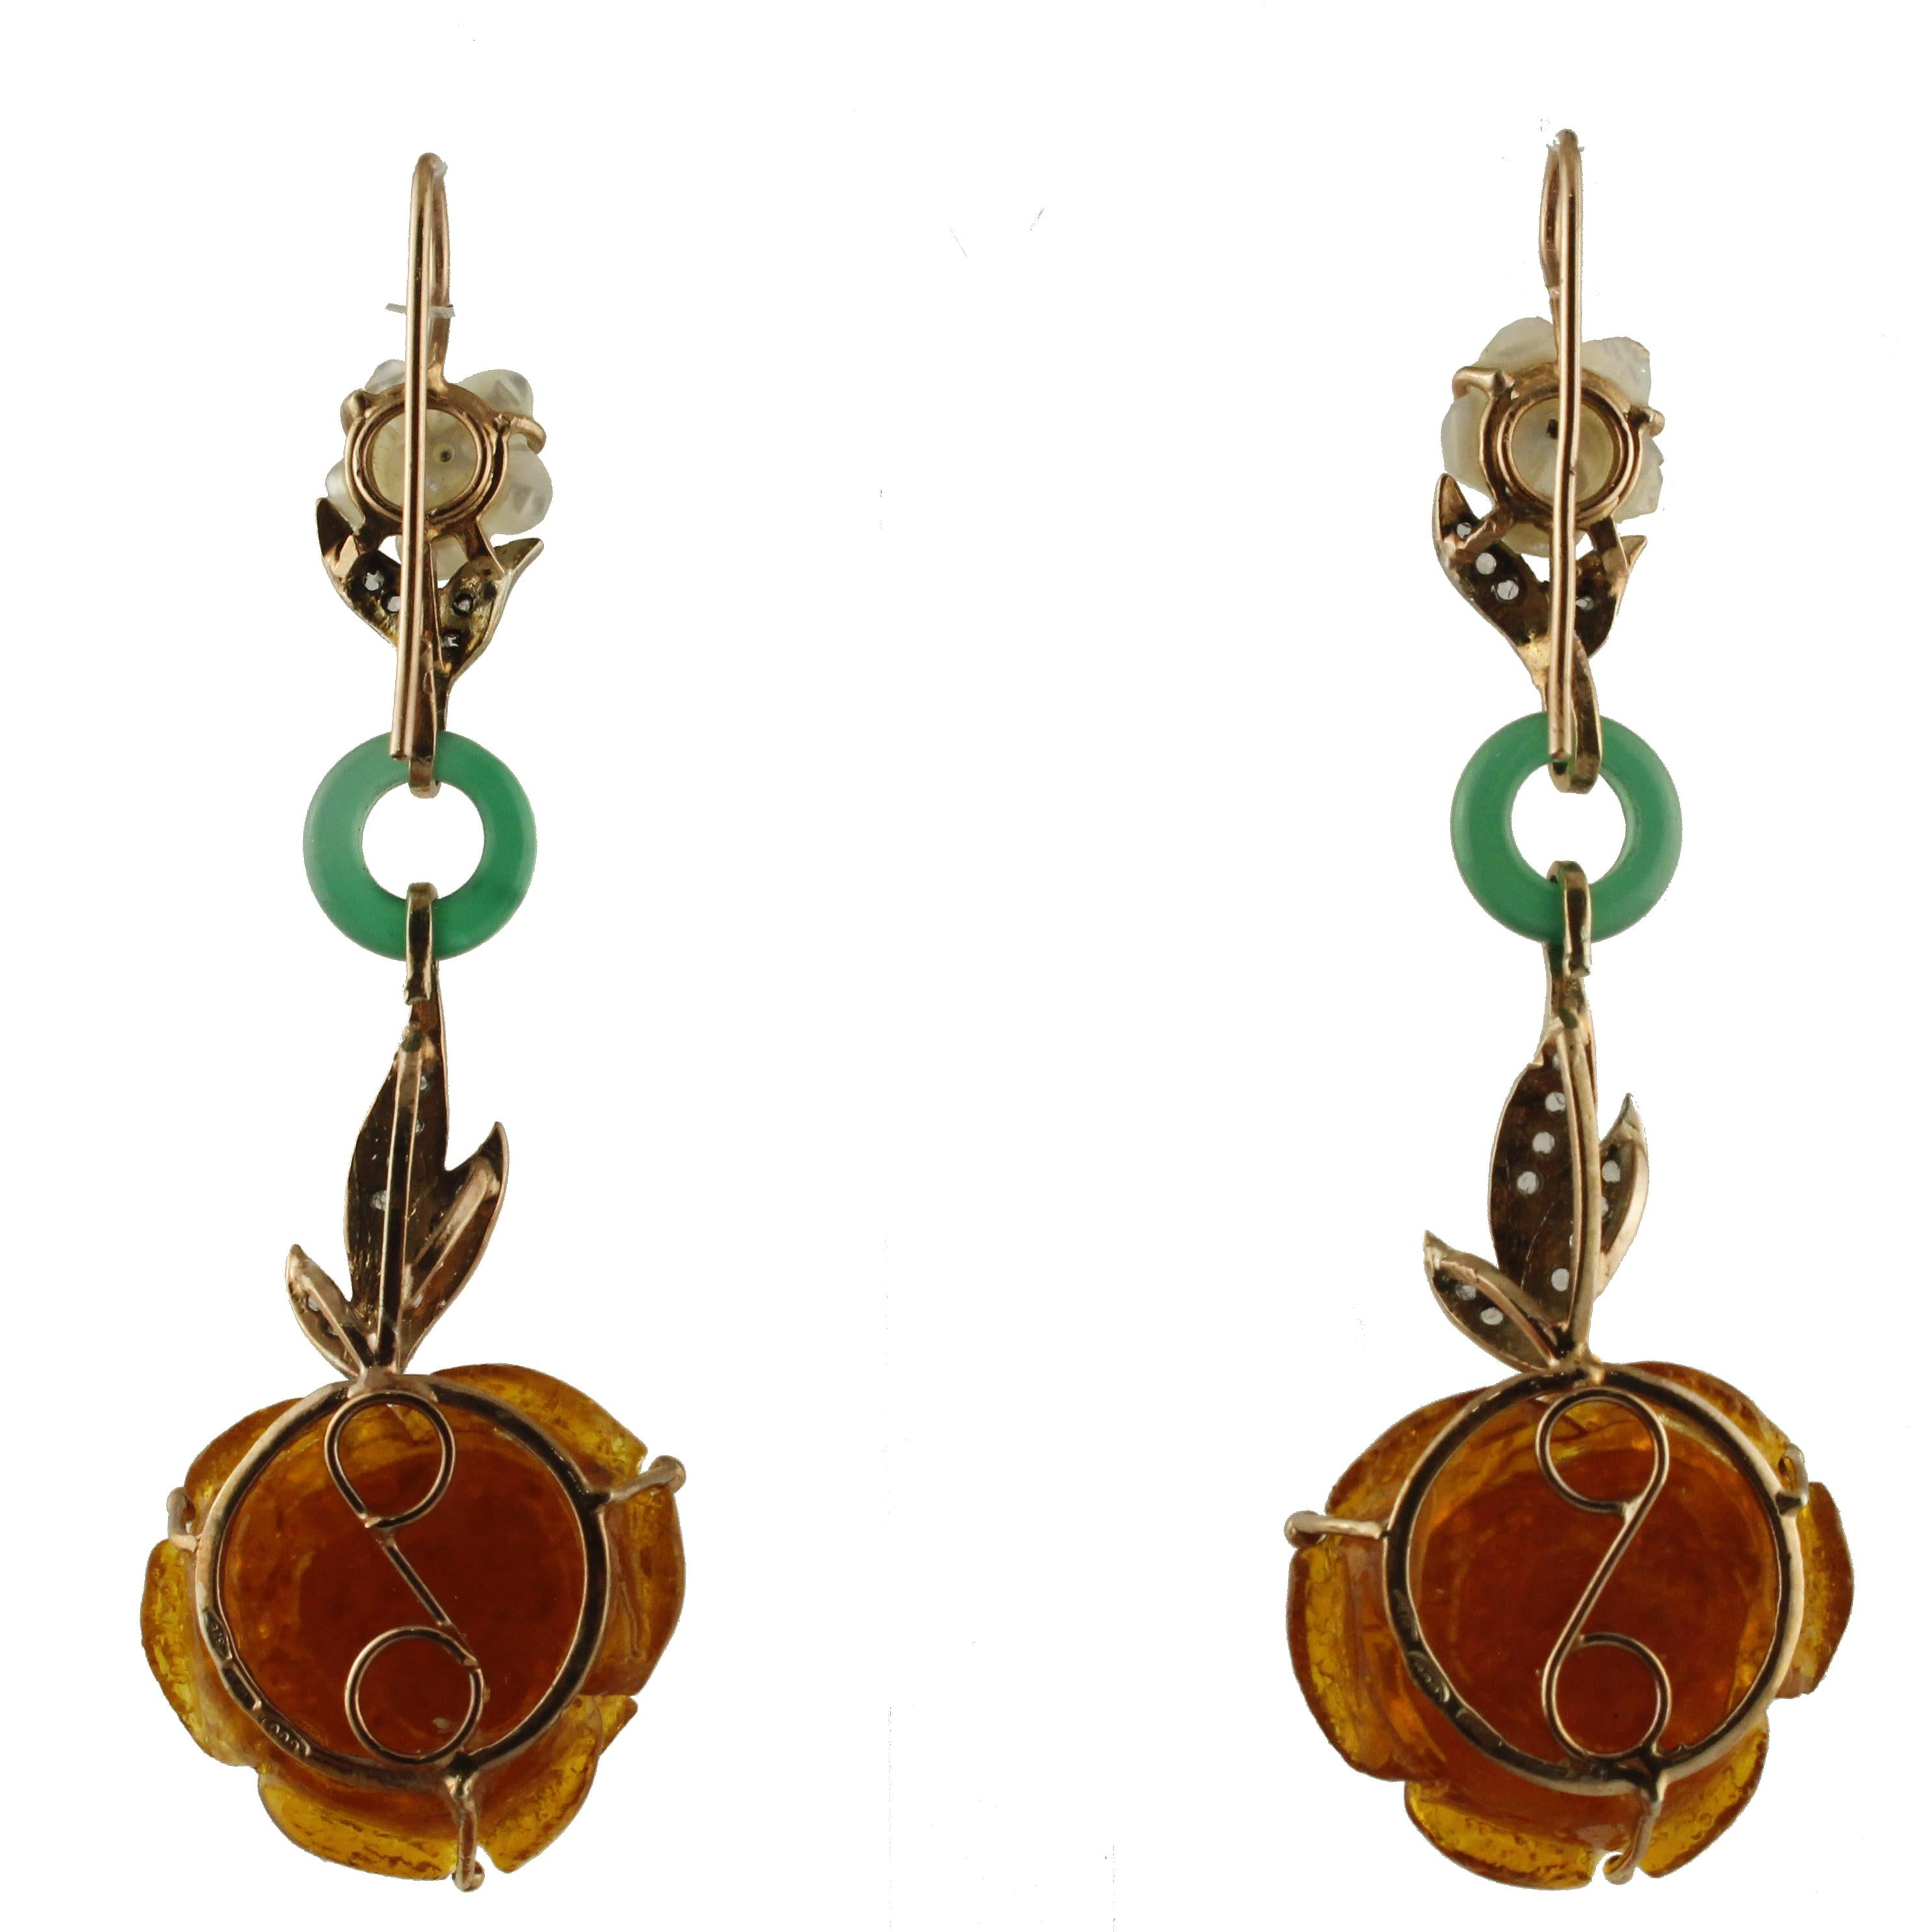 Fabulous 9 kt rose gold dangle earrings, 7.50 cm long, with 0.4 g of mother-of-pearl flowers, with a hard stone, onyx, 6.64 g jade, in thin, diamond-studded silver leaves for 0 , 23 ct. Total weight 12.65 g.
Mother of pearl g 0.4
Hard stones g